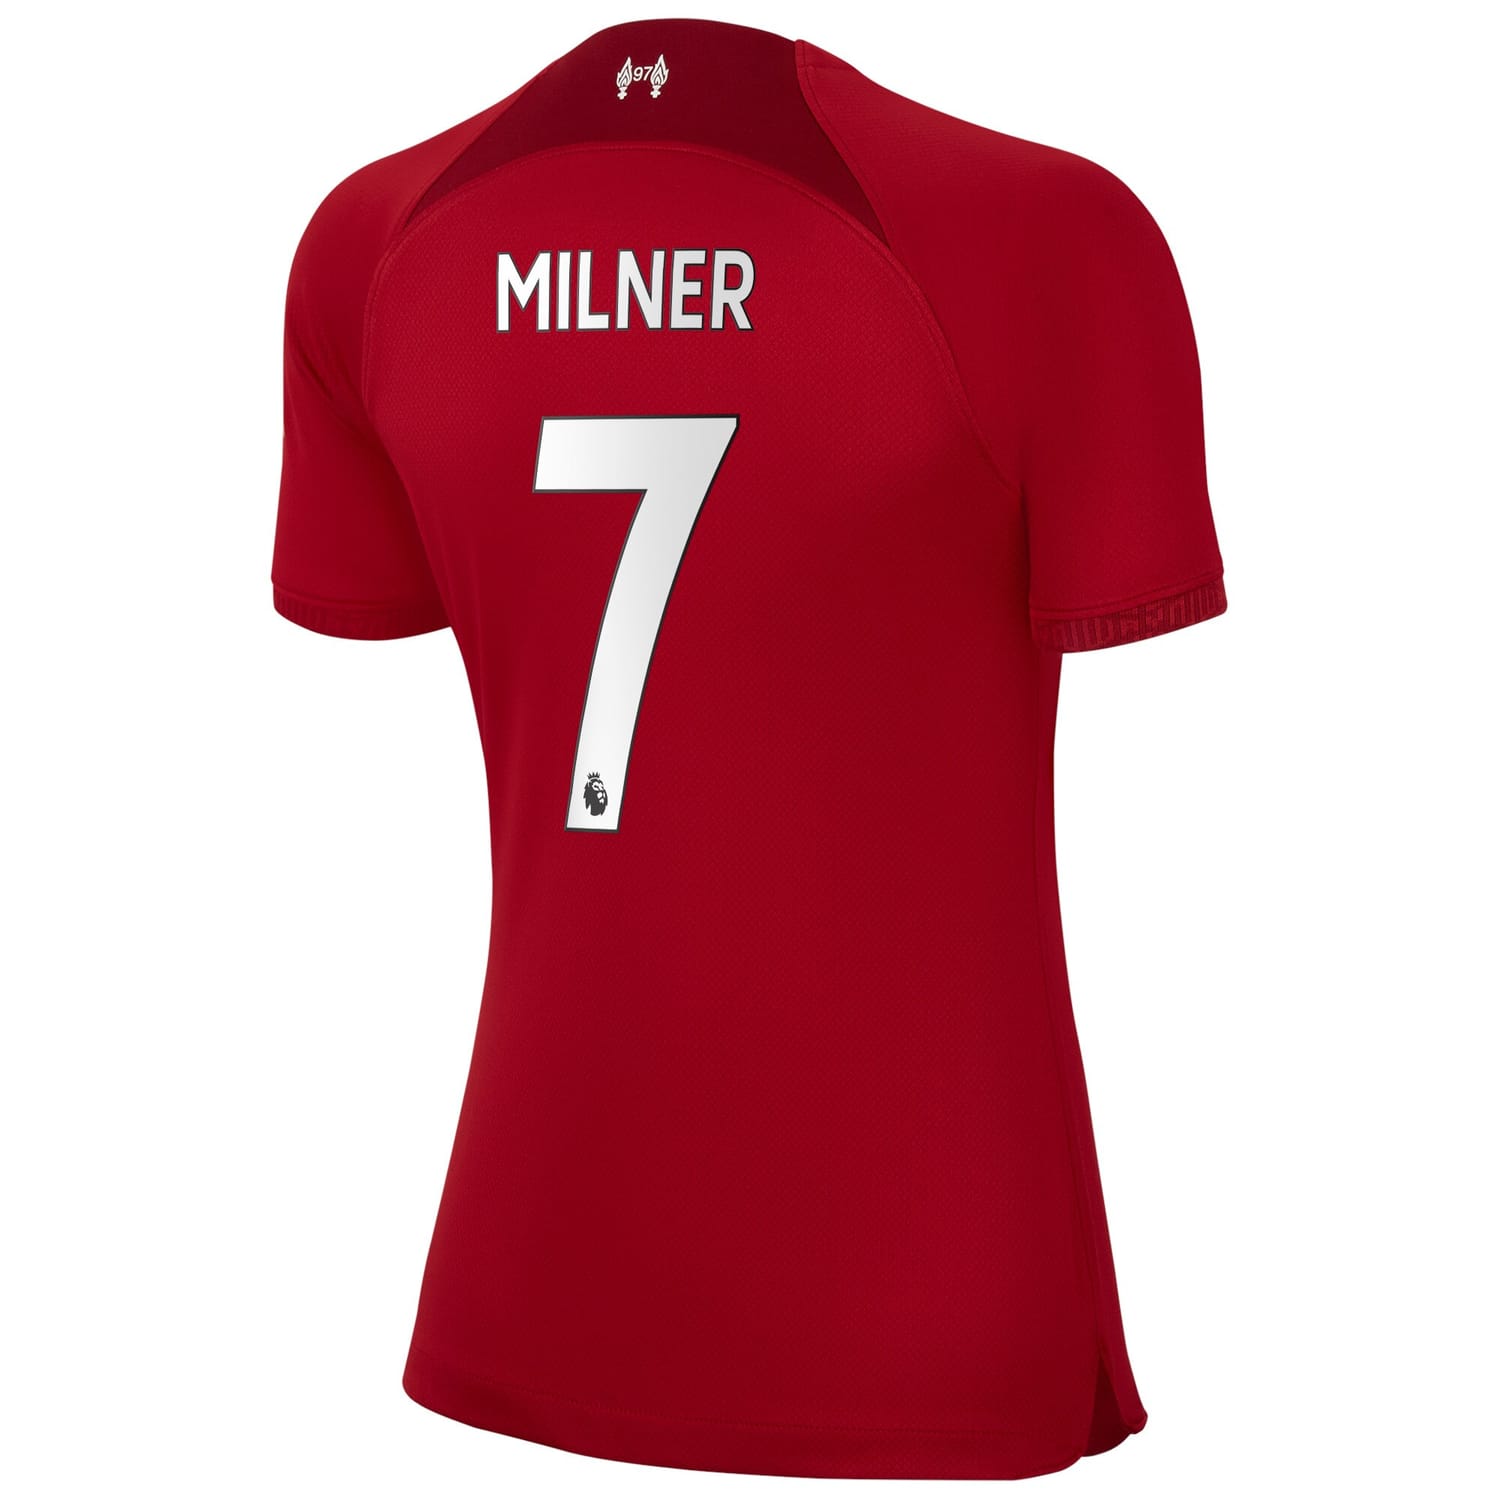 Premier League Liverpool Home Jersey Shirt 2022-23 player Milner 7 printing for Women